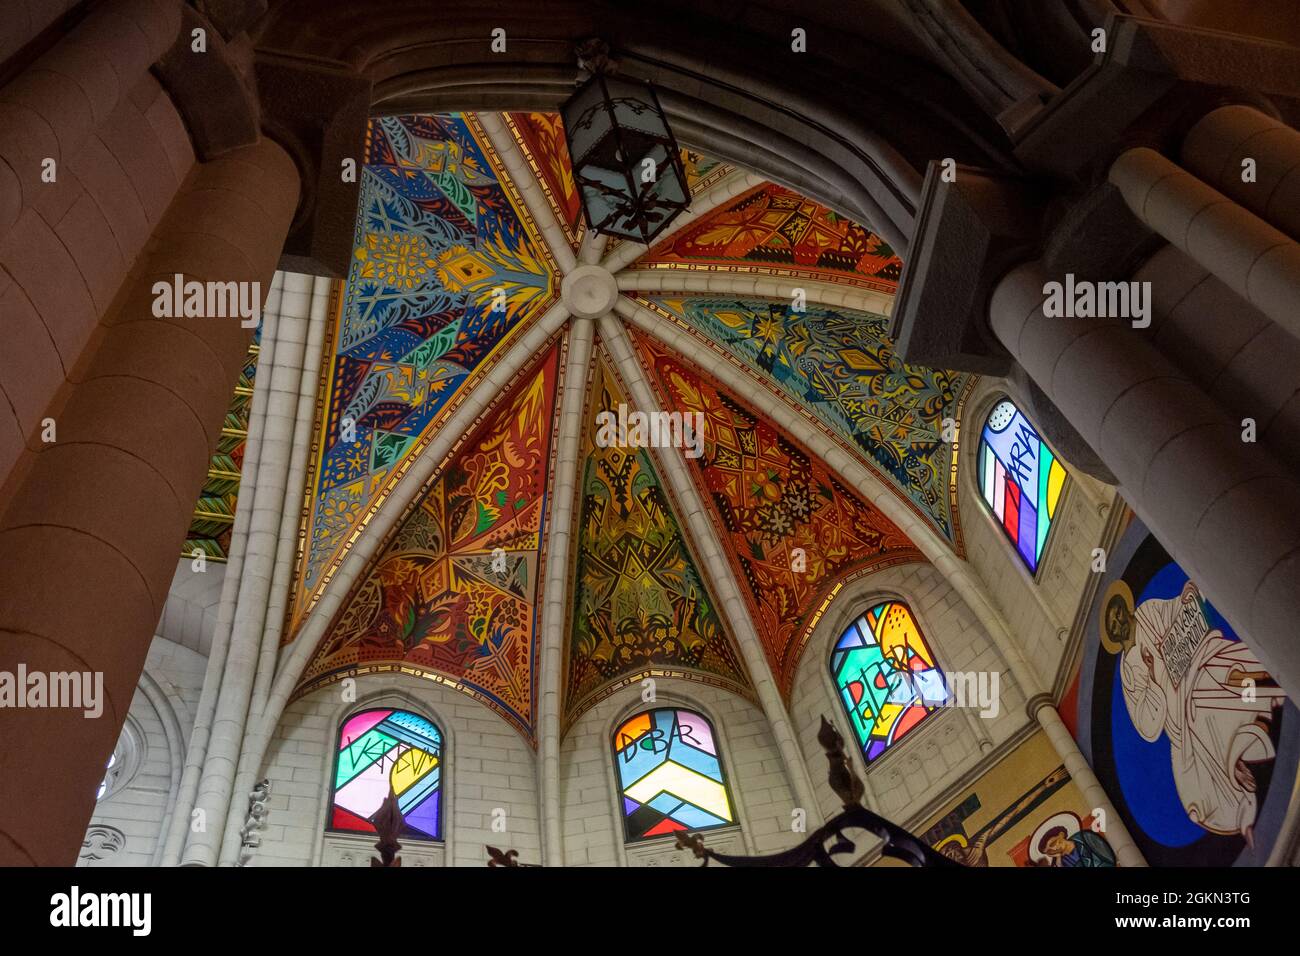 Ceiling of Almudena Cathedral, Madrid, Spain Stock Photo